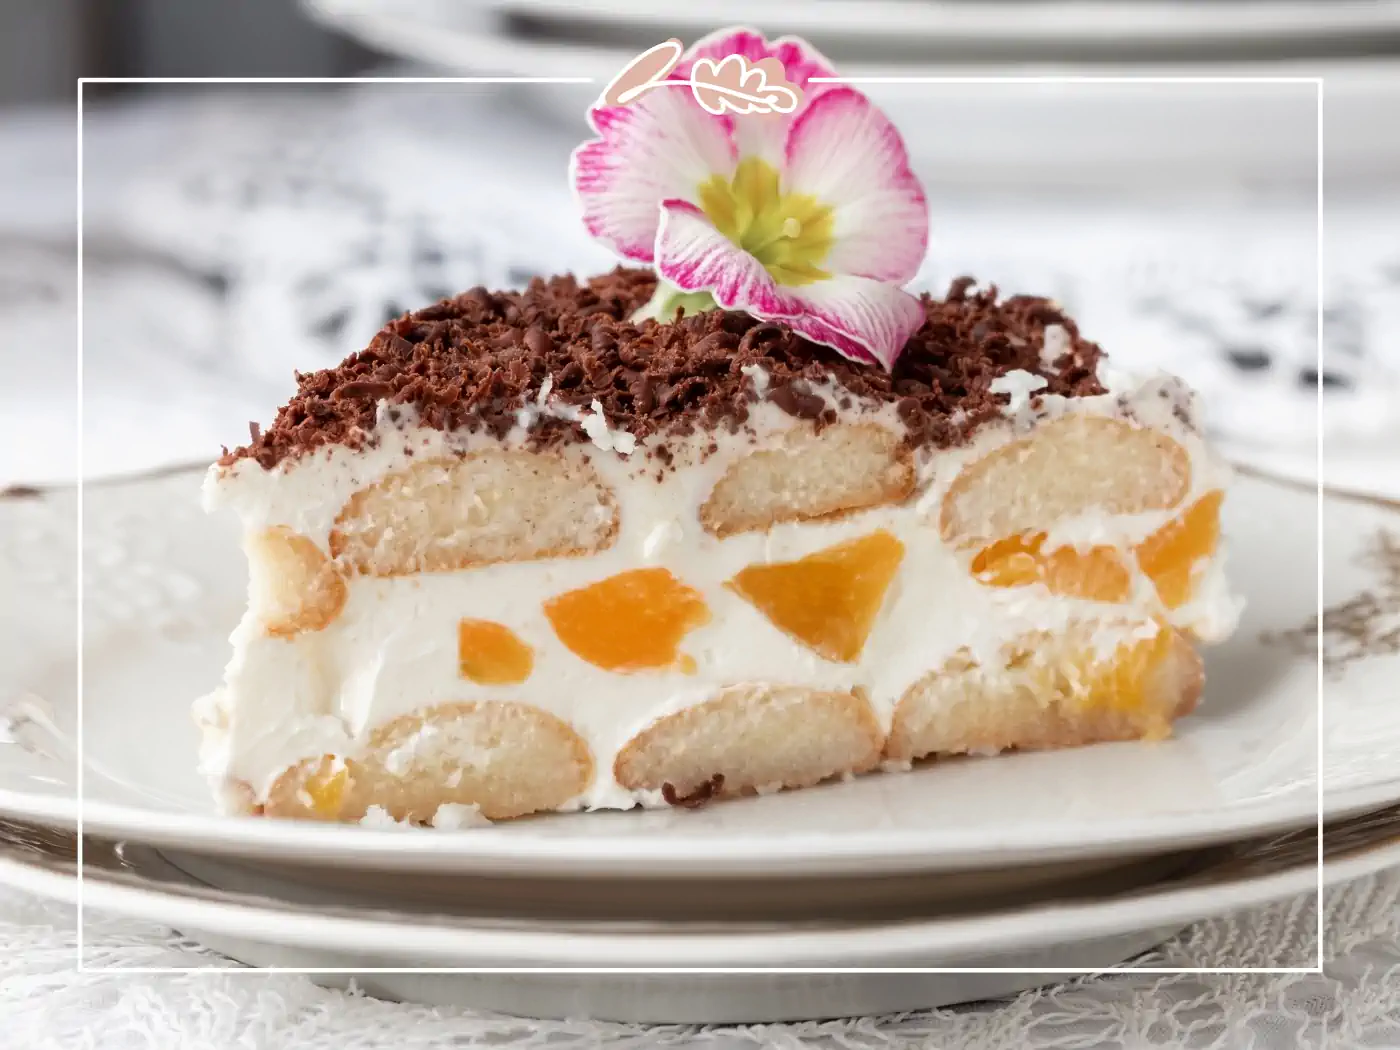 Slice of dessert topped with chocolate shavings and an edible flower. Fabulous Flowers and Gifts.